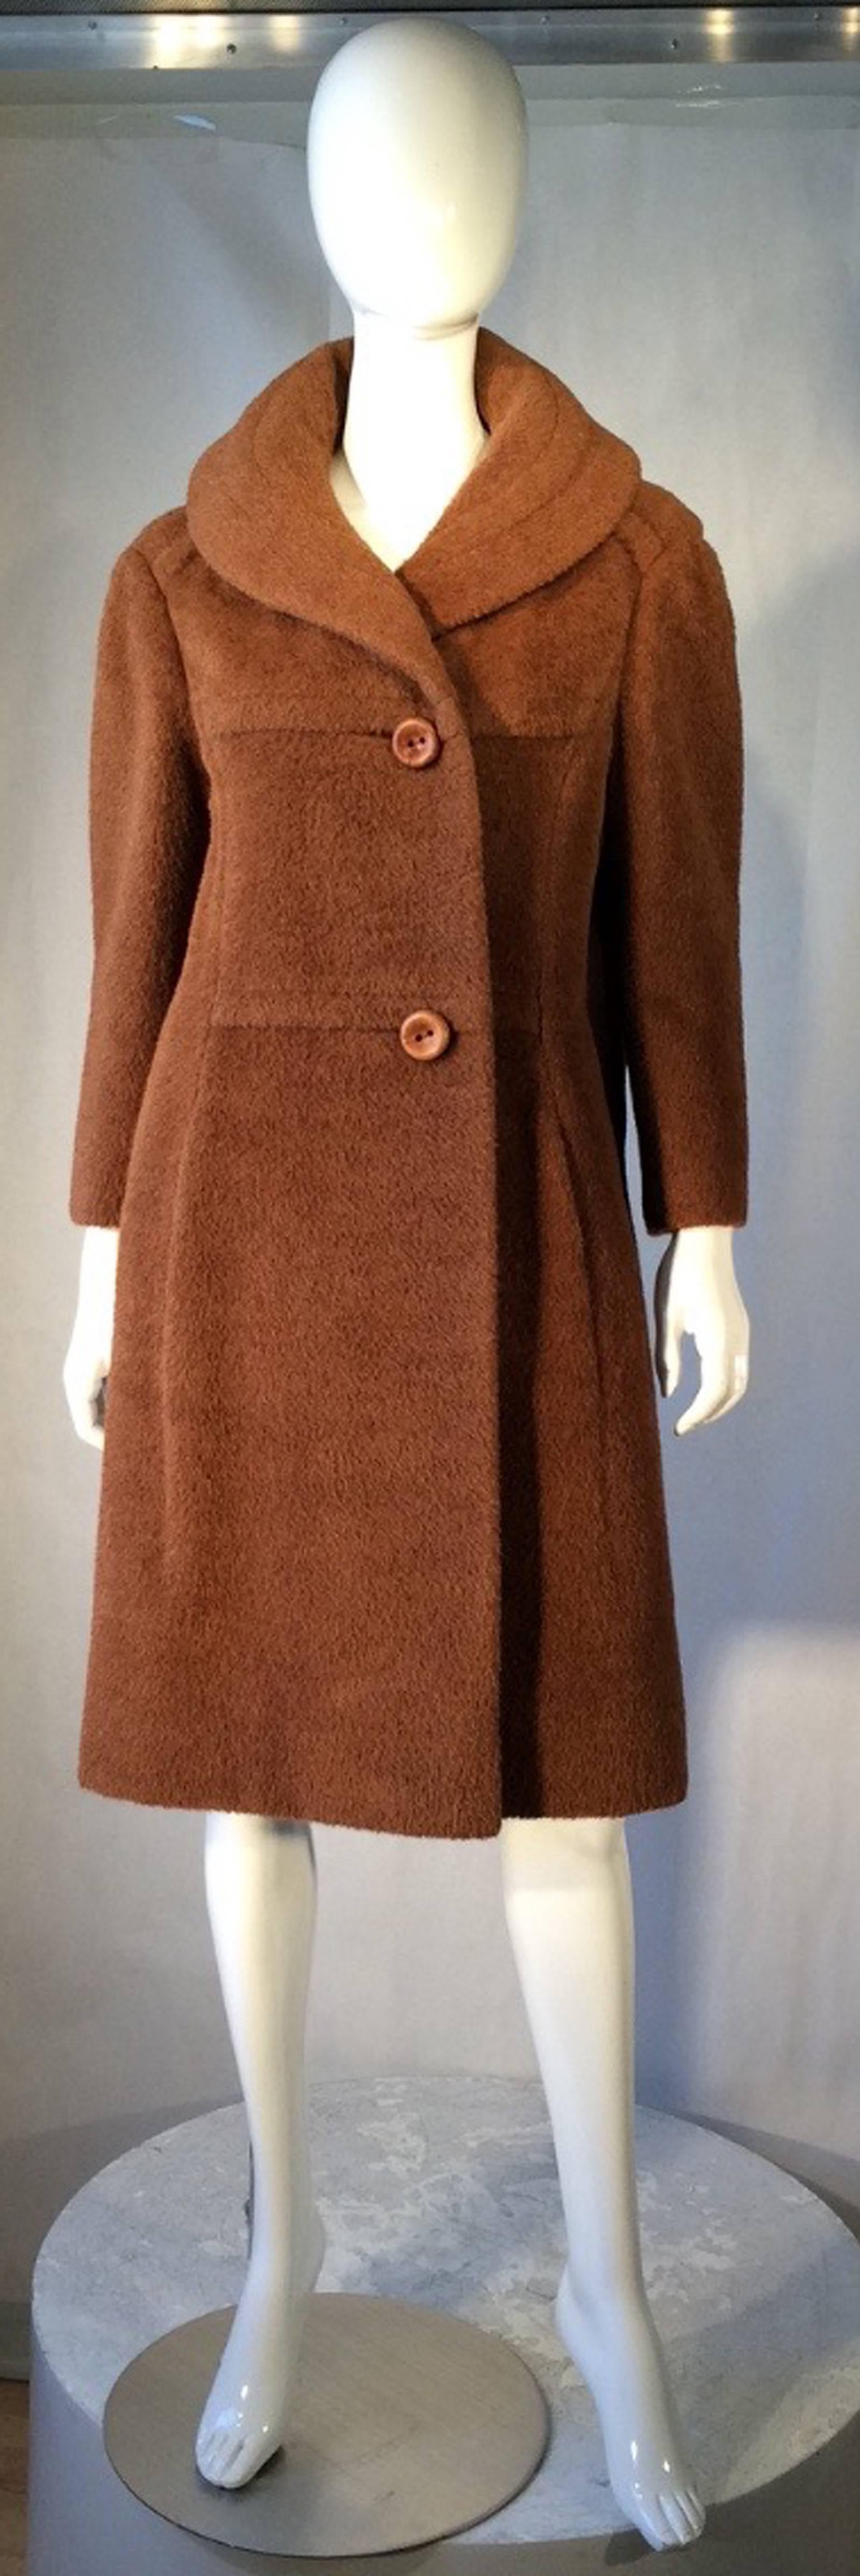 A fine and rare vintage Galanos mohair coat. Sculpted wool item features a shawl collar, precision seams and unusual sculpted back panel. Item fully silk lined with original button front. Pristine possibly unworn.